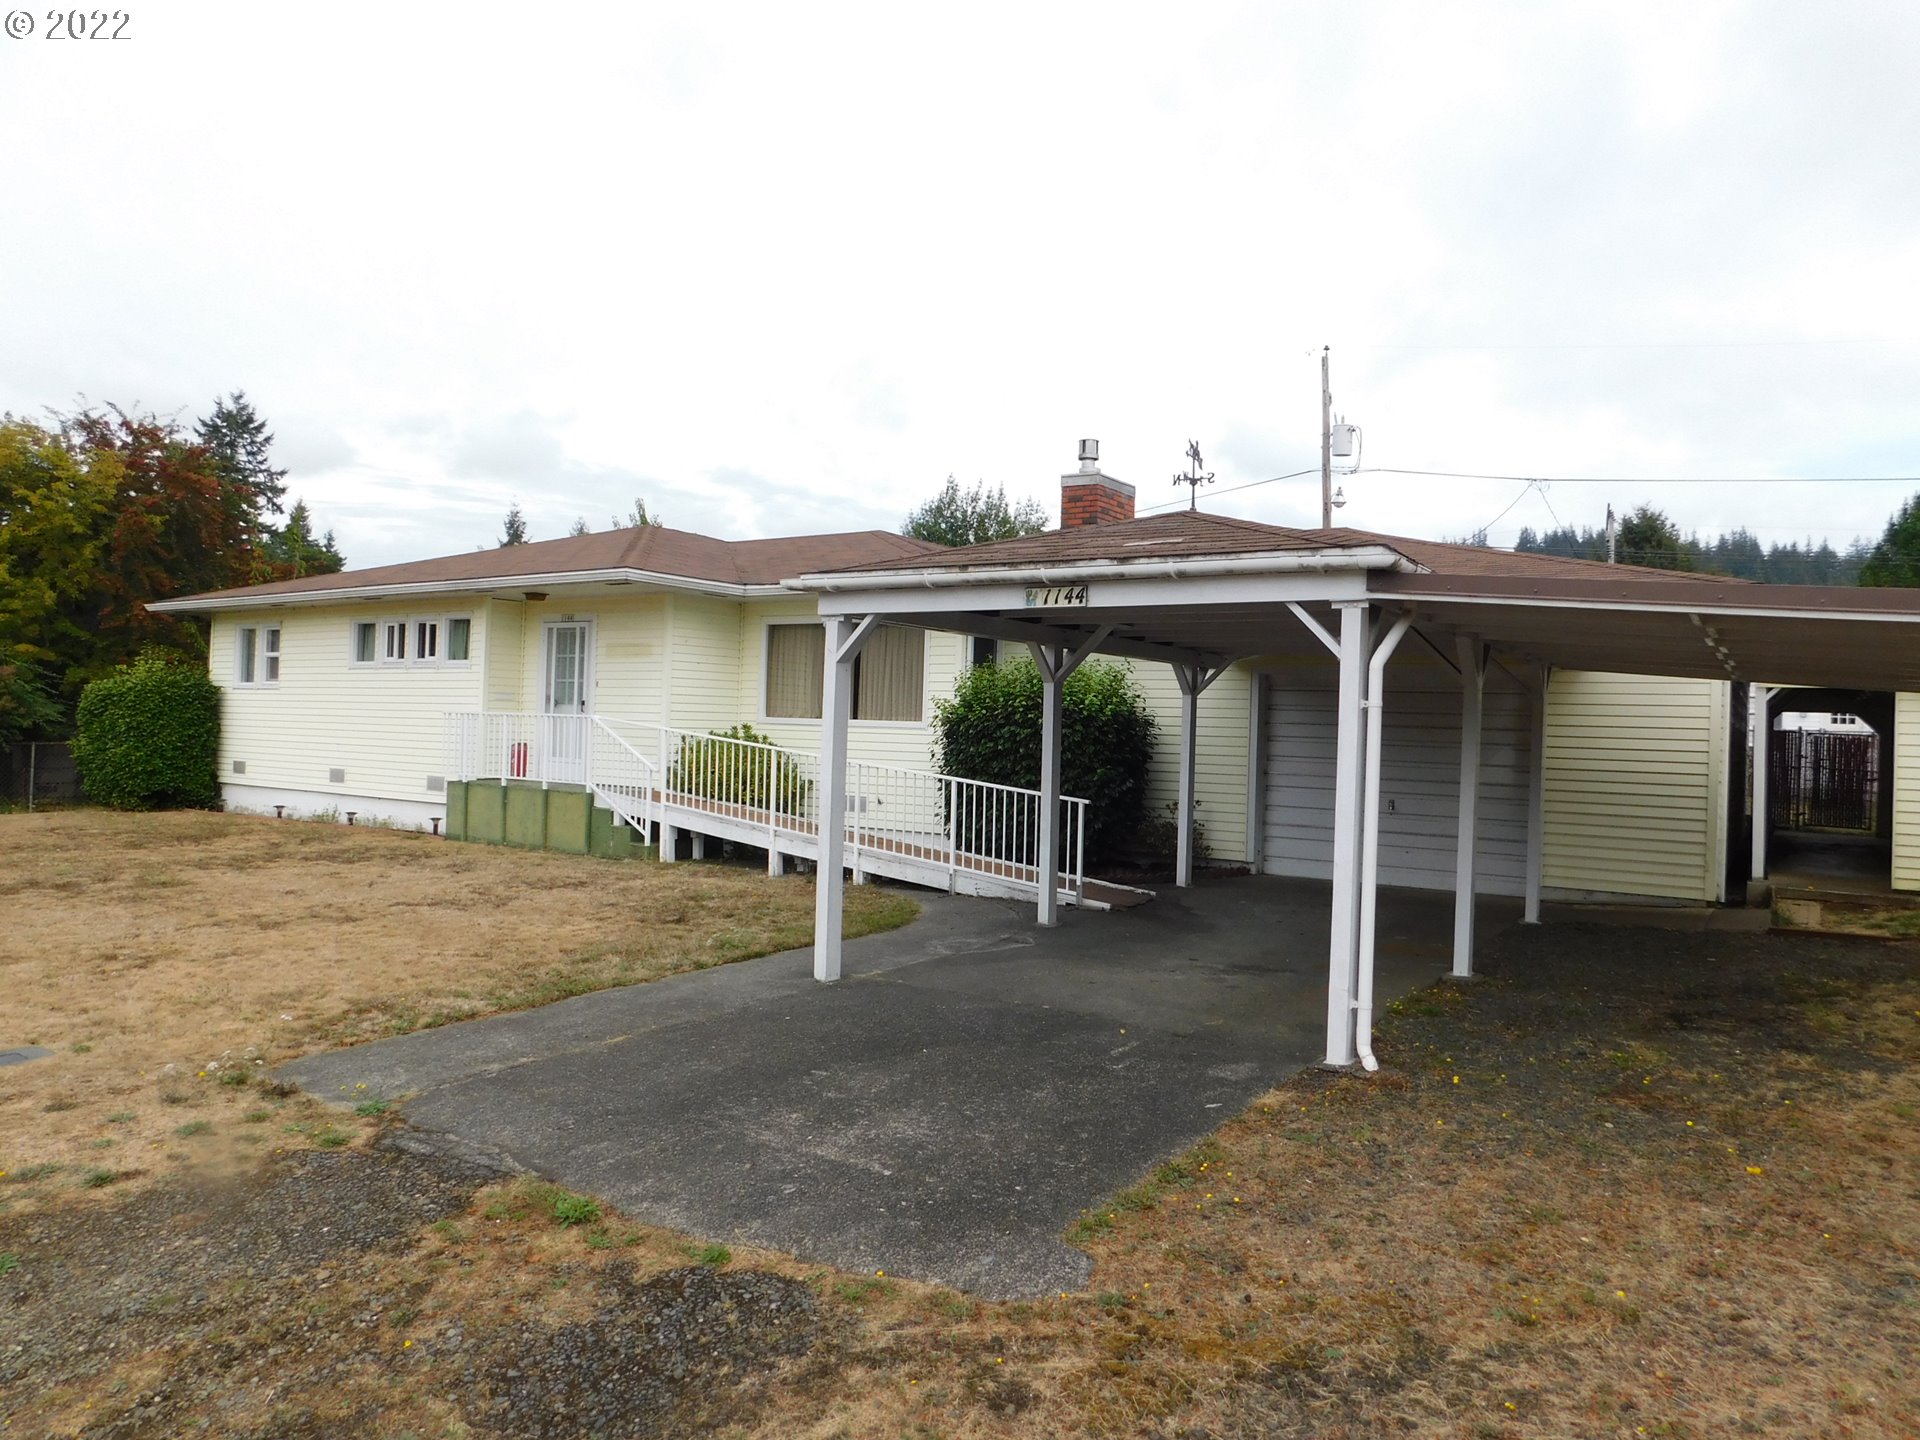 1144 N BAXTER ST, Coquille, OR 97423